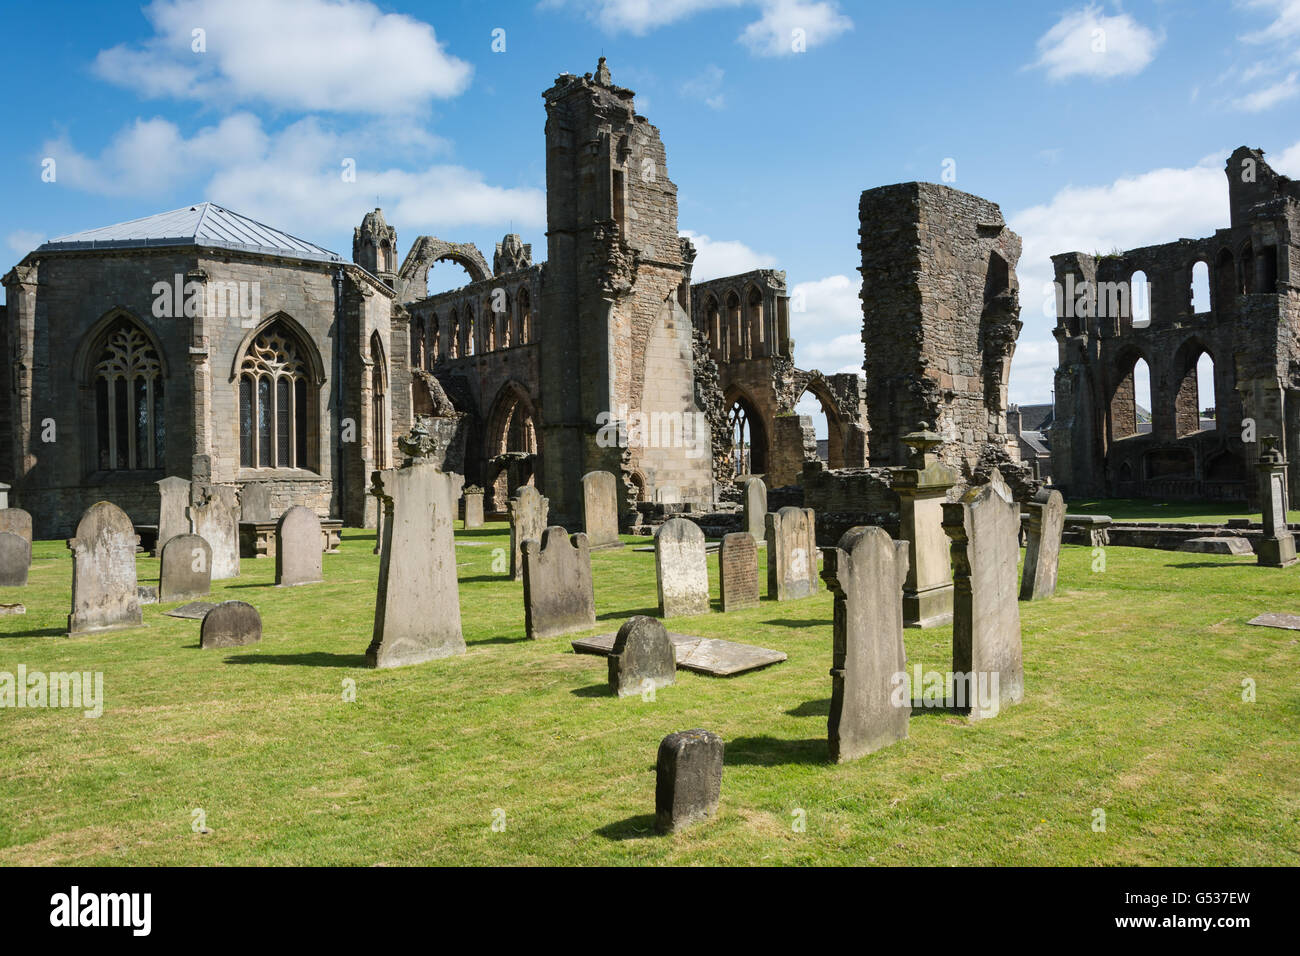 United Kingdom, Scotland, Moray, Elgin, Cemetery of the Elgin Cathedral, destroyed during the Reformation, Elgin is the largest city in Moray Stock Photo